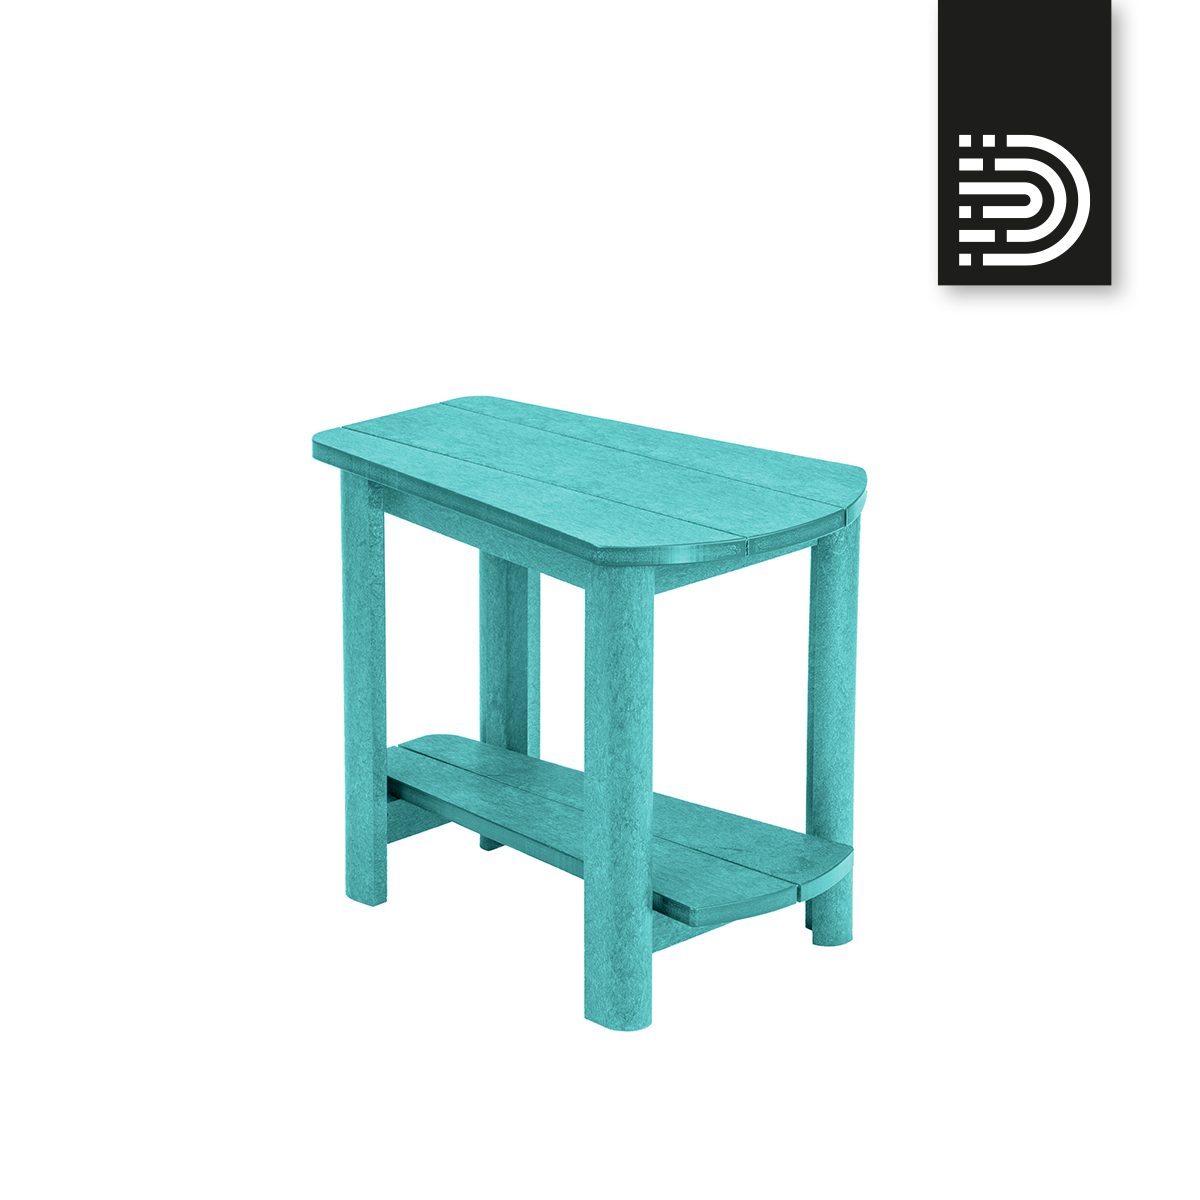 T04 Addy Side Table - turquoise 09